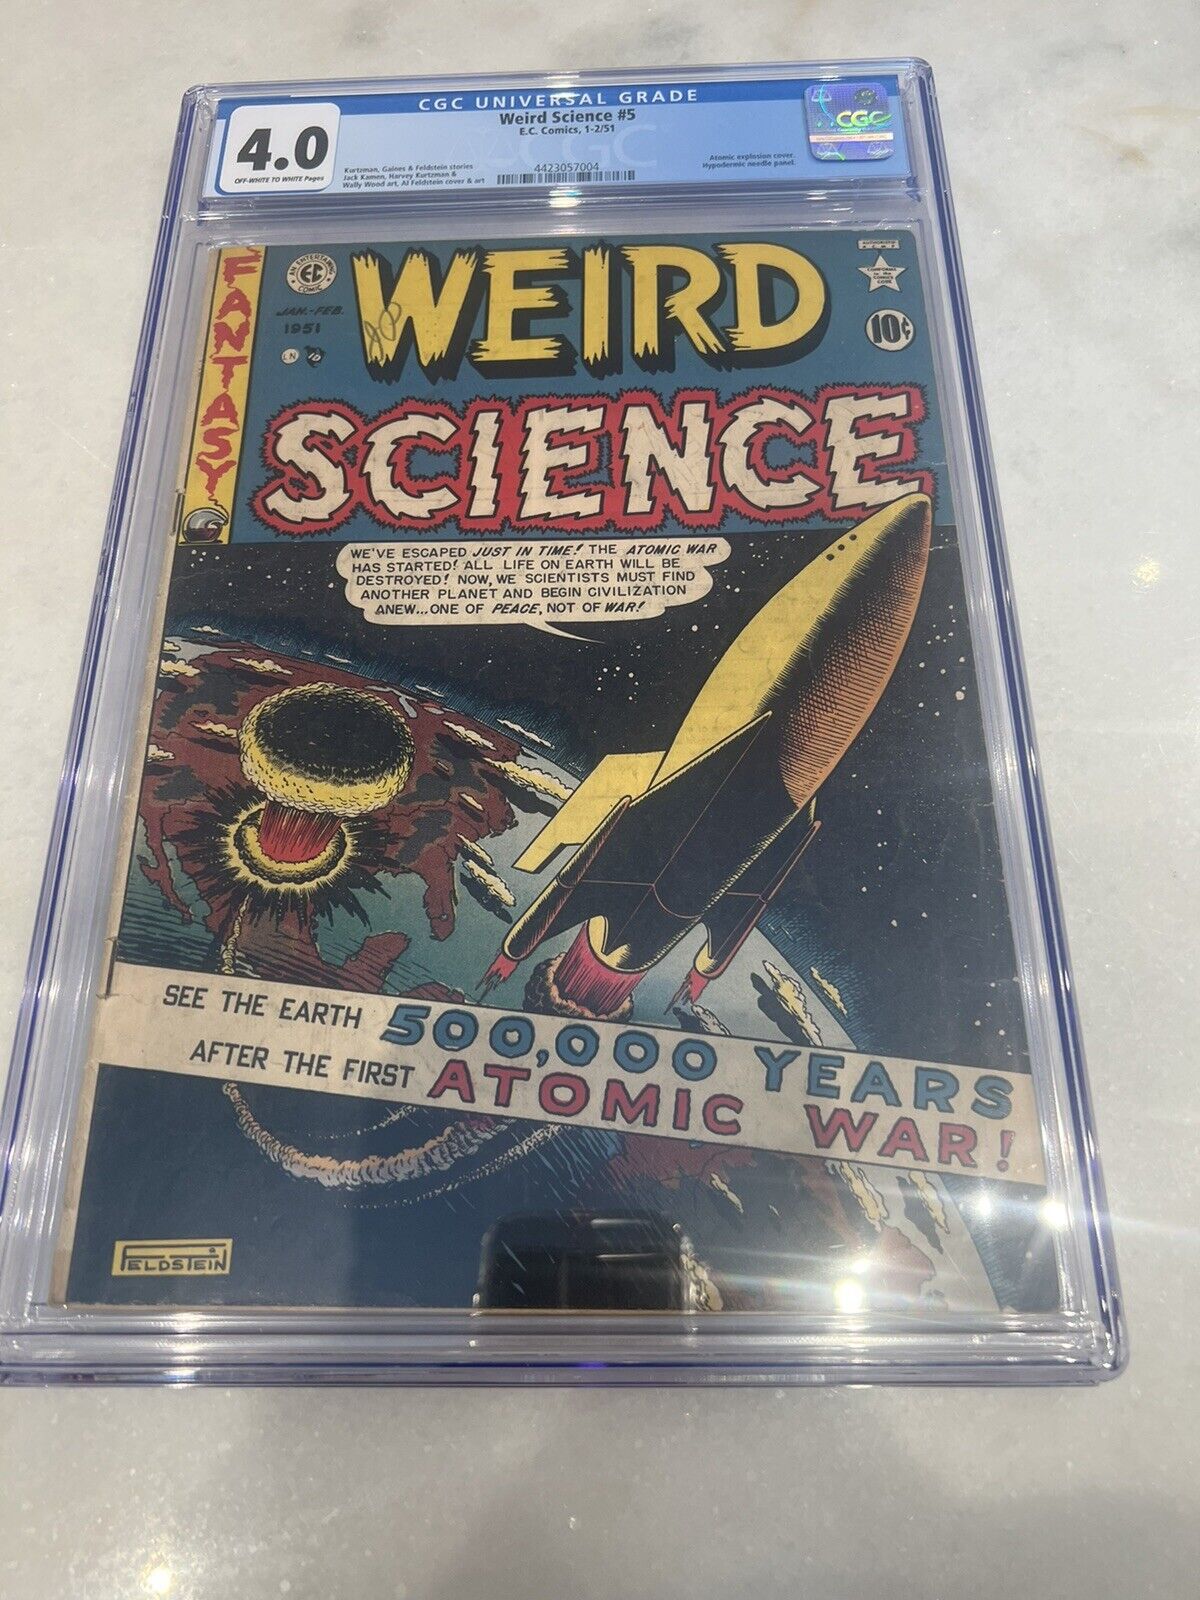 Weird Science #5 E.C. 1-2/51 CGC 4.0 VG- Off-White Pages ￼Atomic Explosion Cover